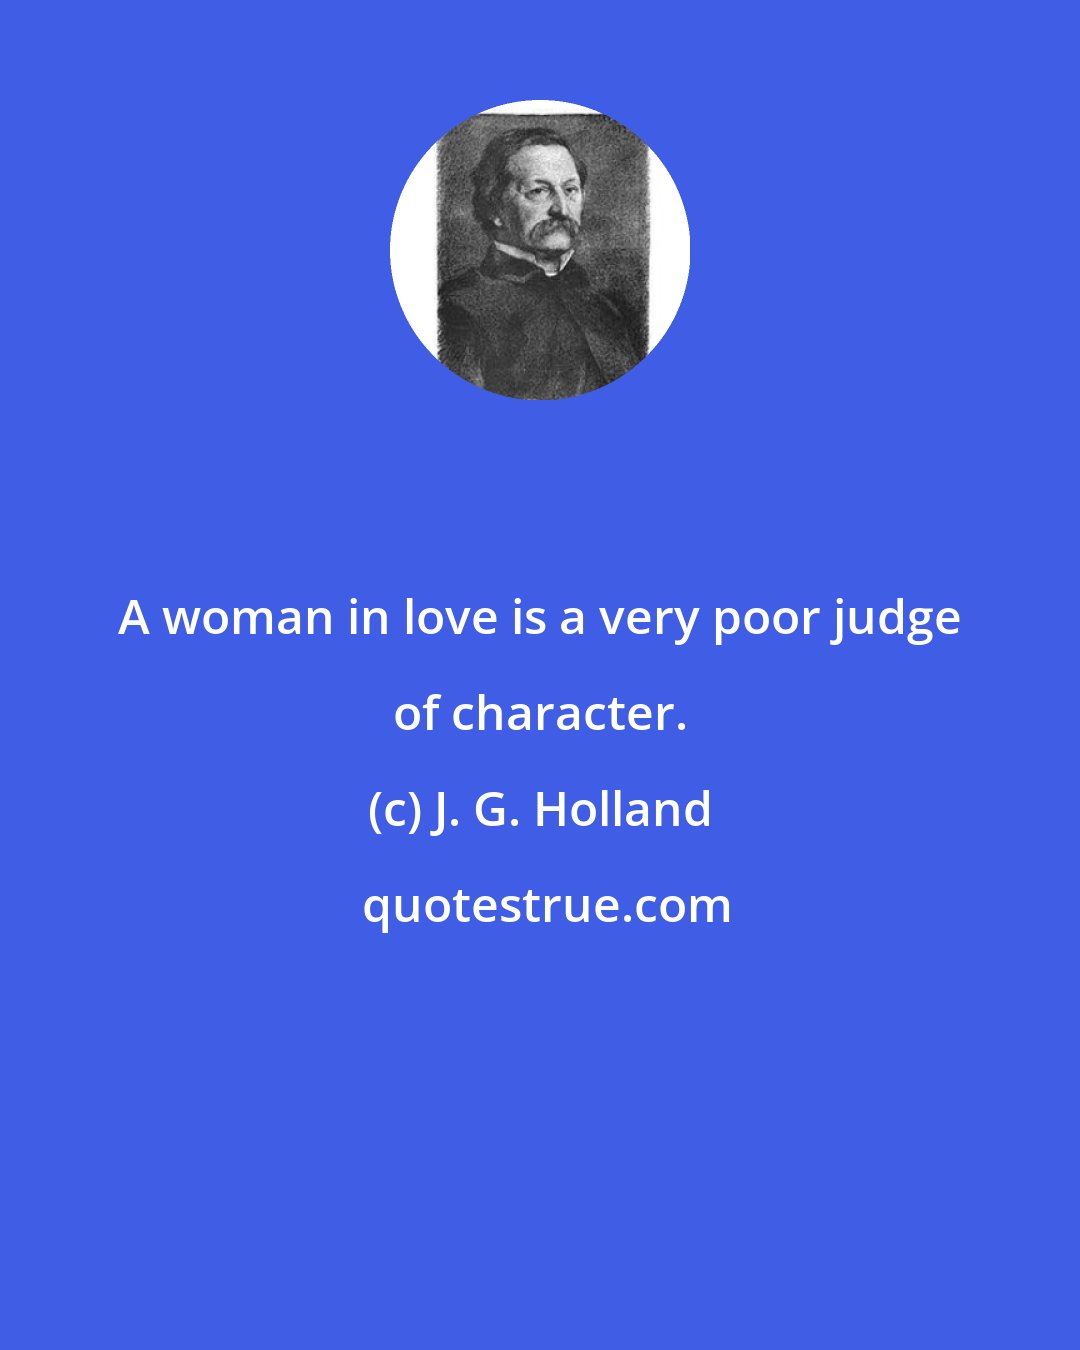 J. G. Holland: A woman in love is a very poor judge of character.